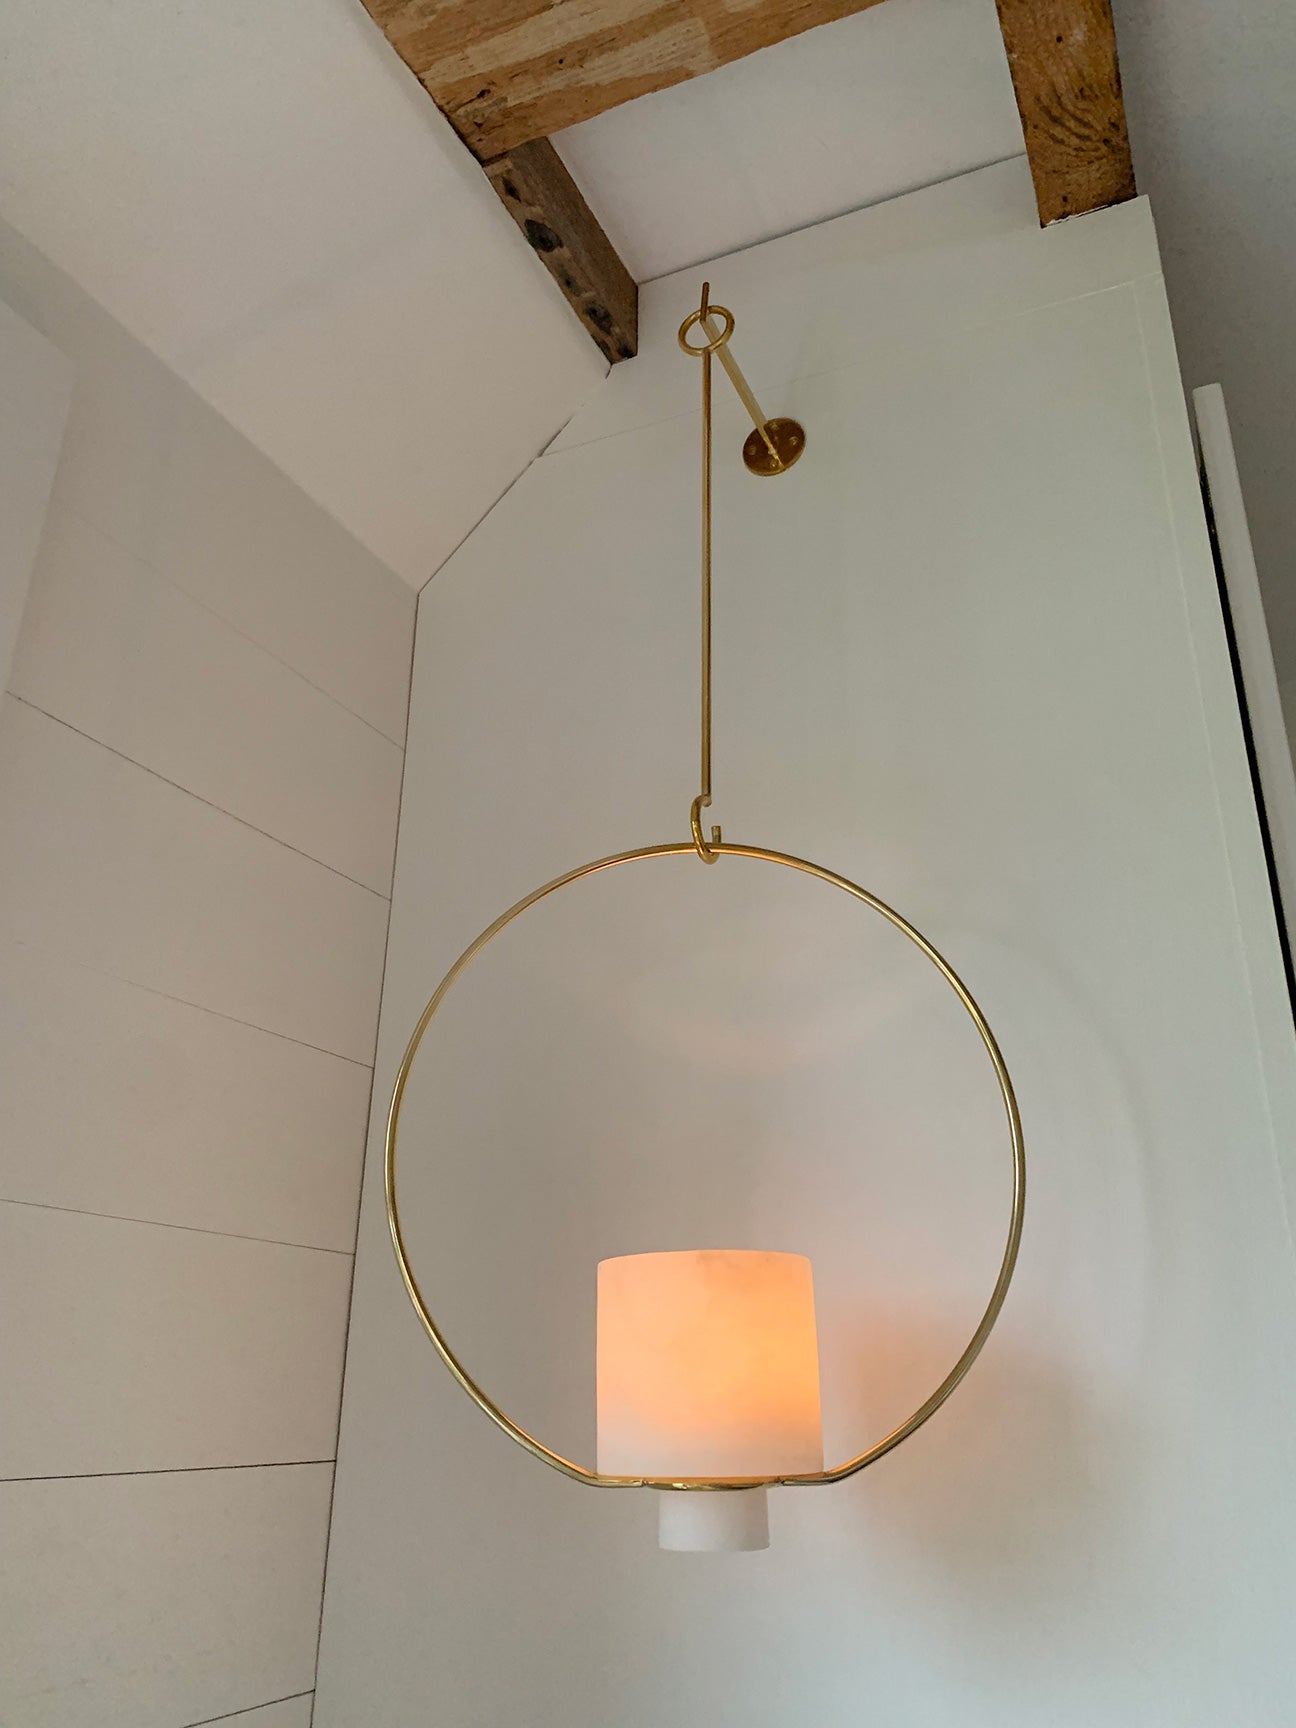 Image of M+A NYC Hanging Planter/Lantern in Alabaster and Brass lit up with a glass votive inside.